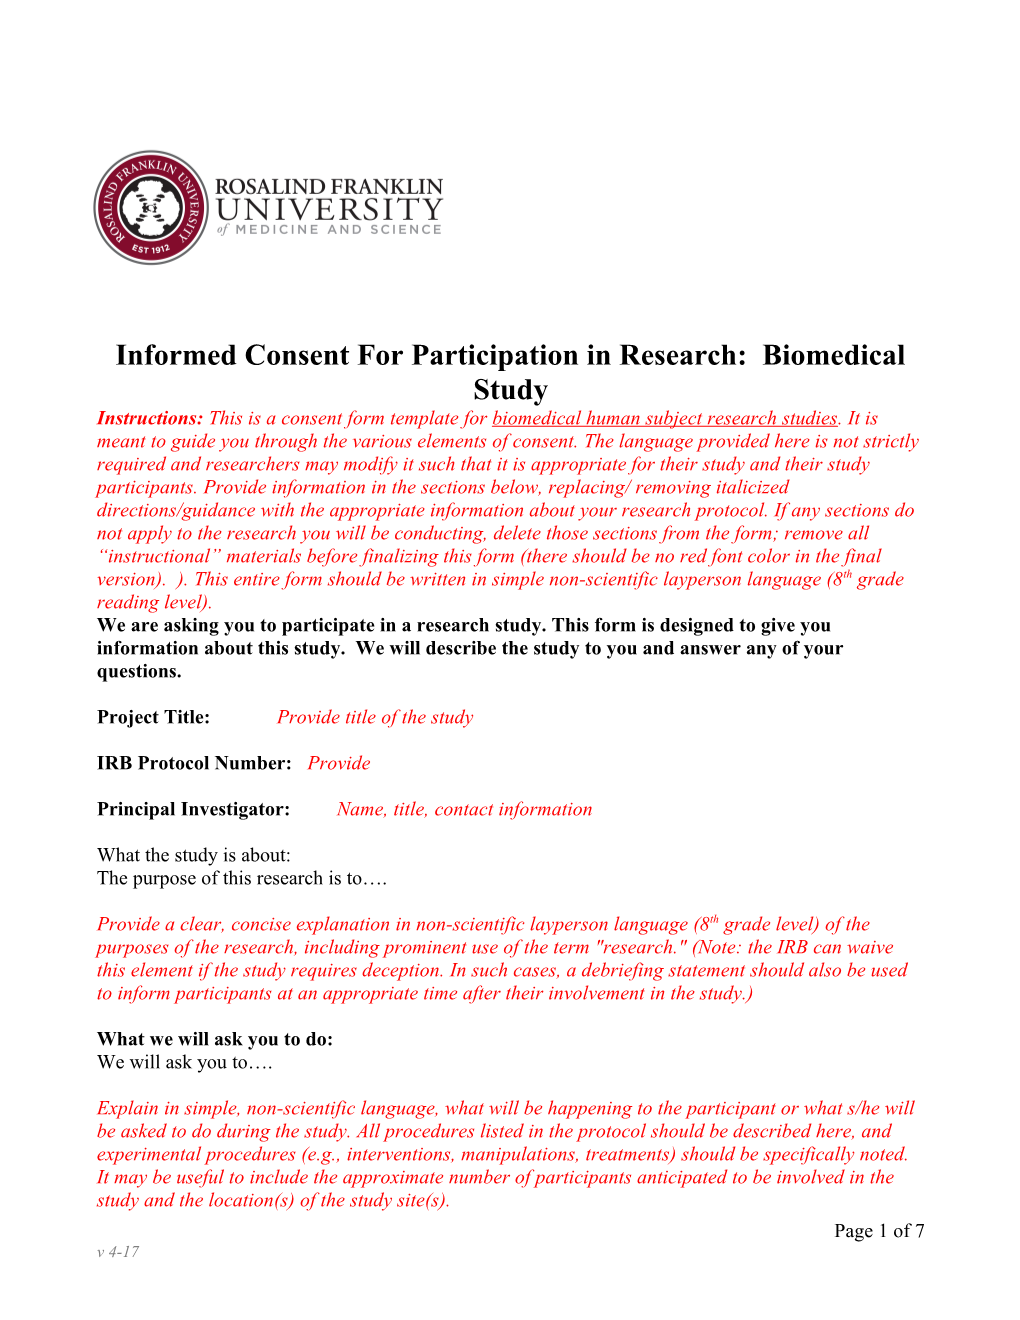 Georgetown University Medical Center IRB Protocol Review Form for Reviewer